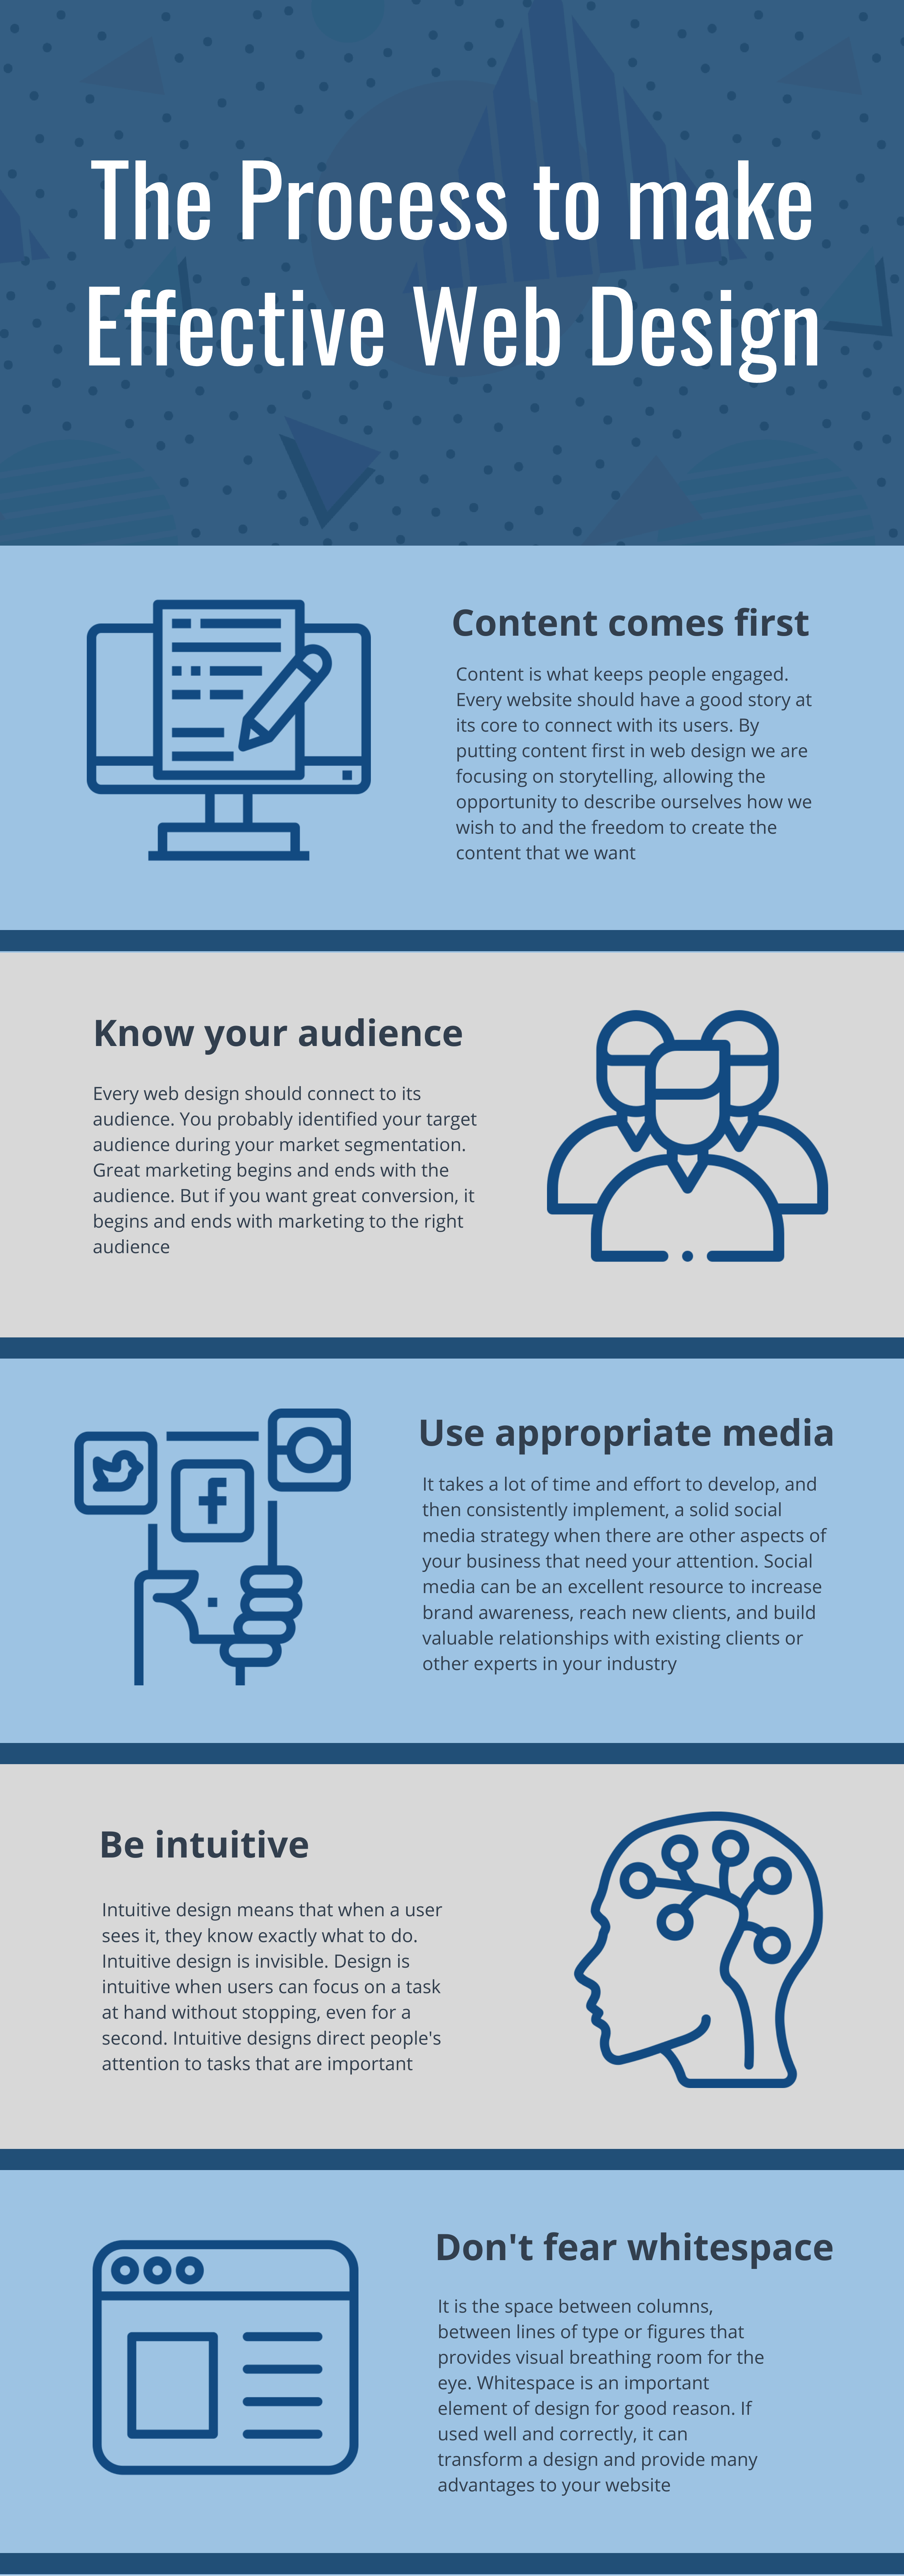 social media infographic template